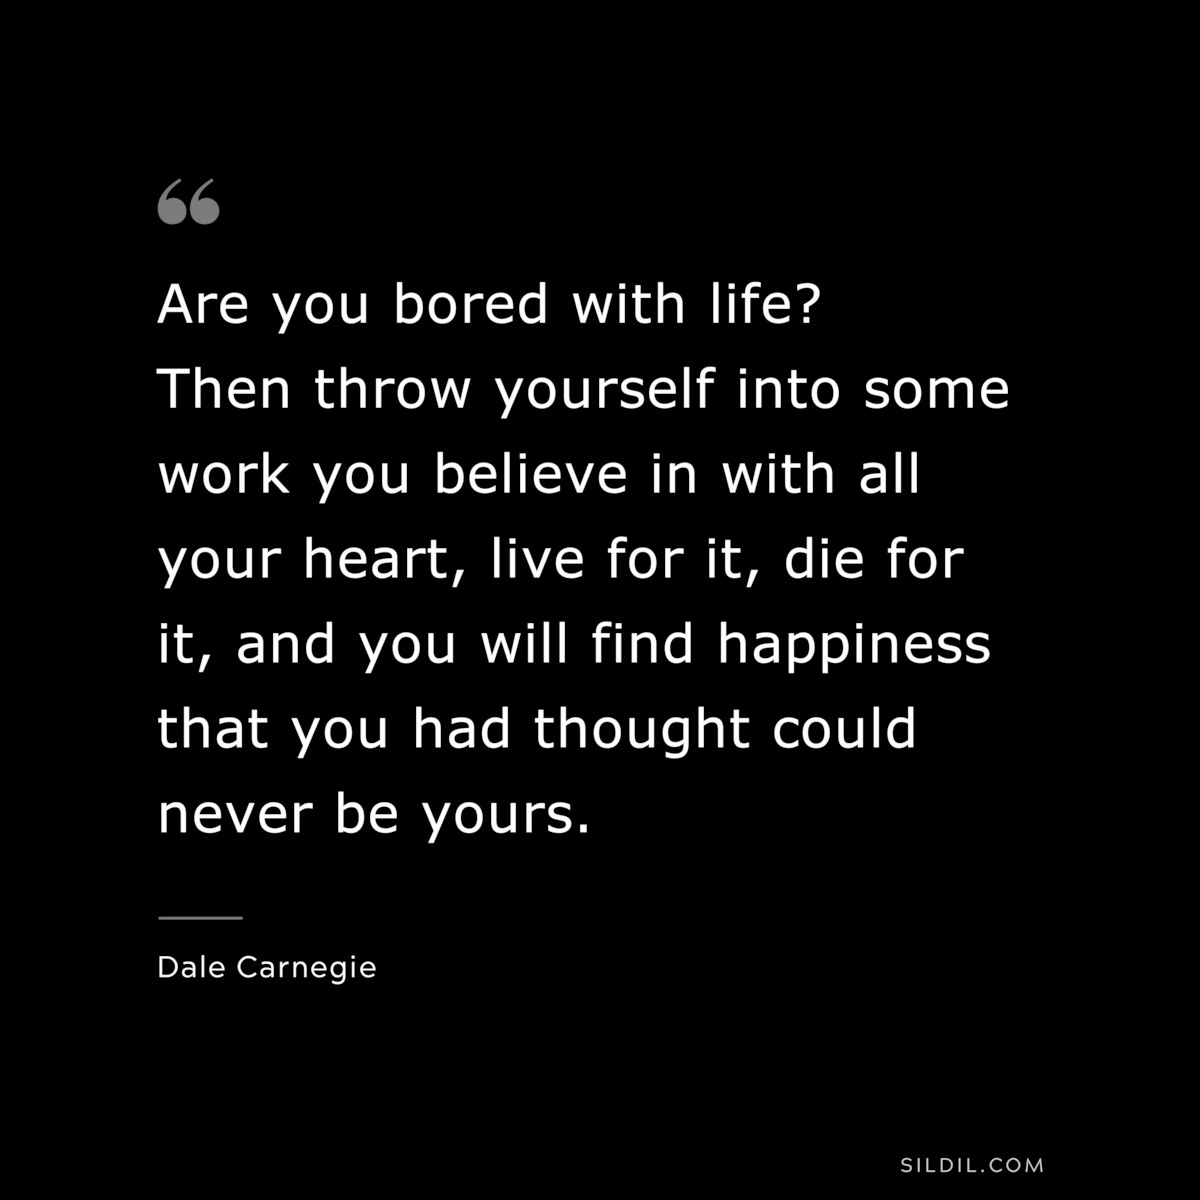 Are you bored with life? Then throw yourself into some work you believe in with all your heart, live for it, die for it, and you will find happiness that you had thought could never be yours.― Dale Carnegie